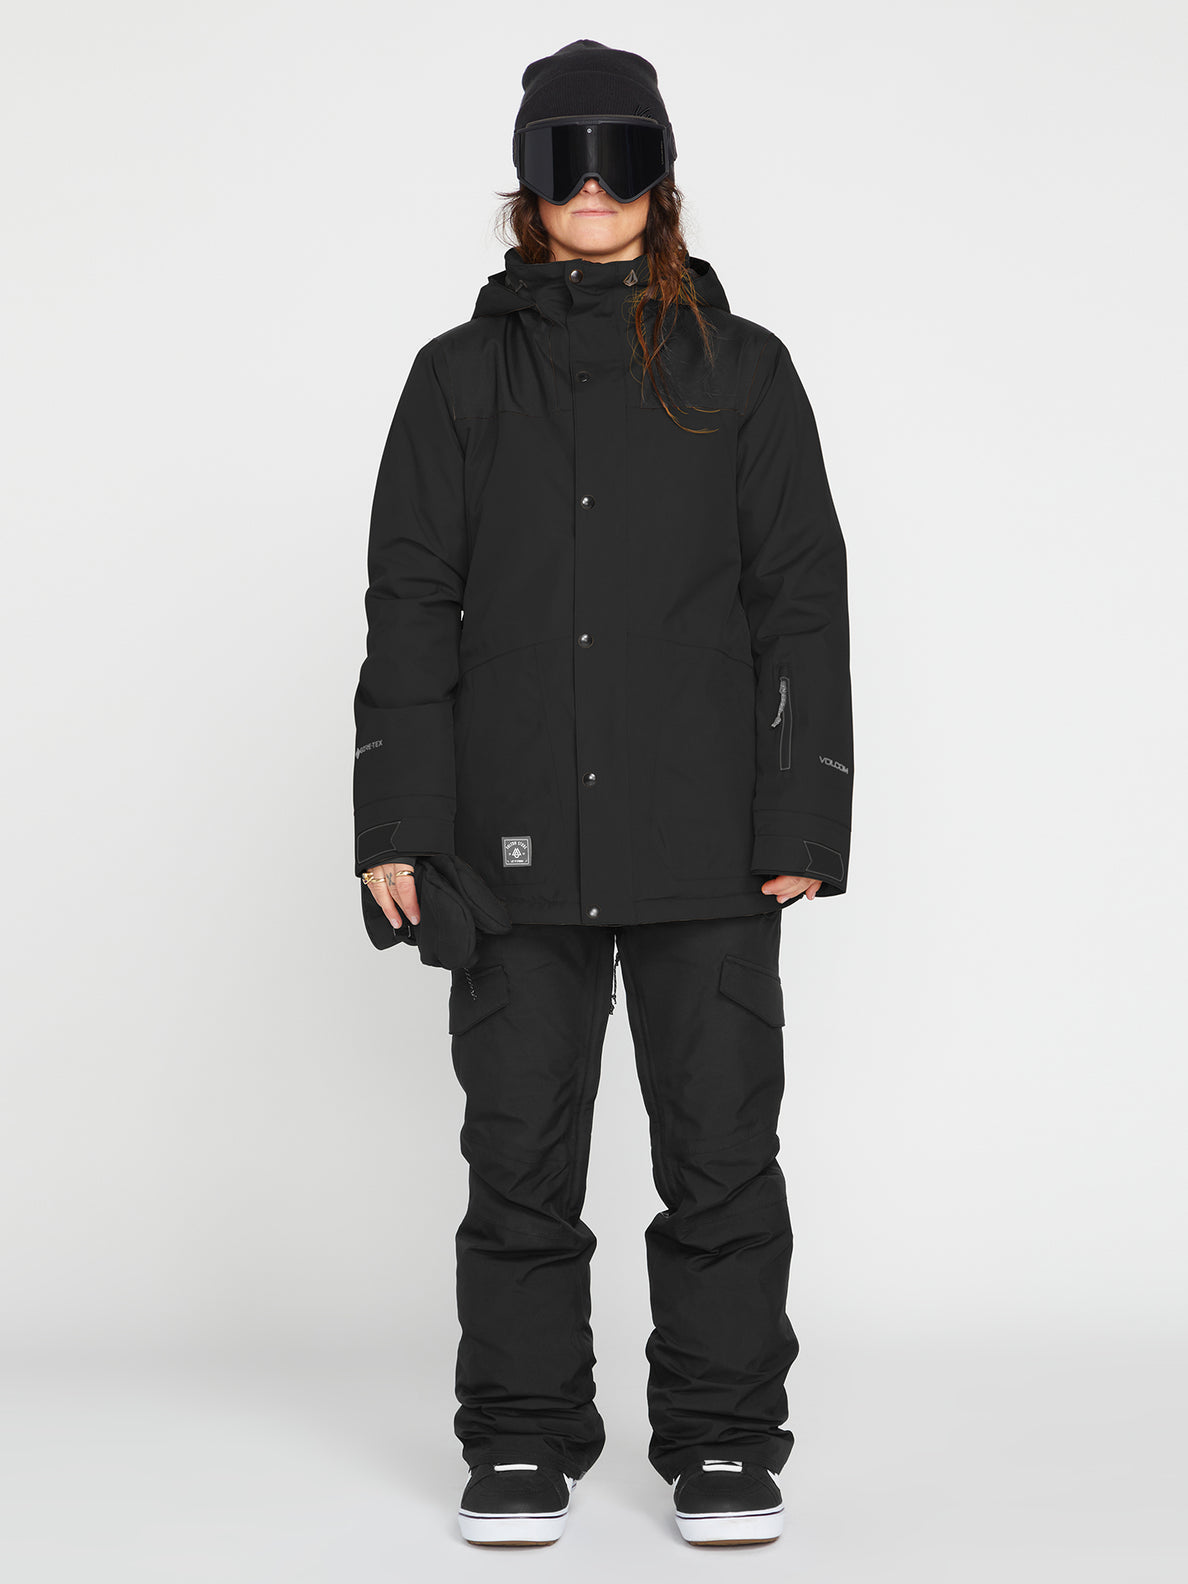 Womens Ell Insulated Gore-Tex Jacket - Black (H0452302_BLK) [F]